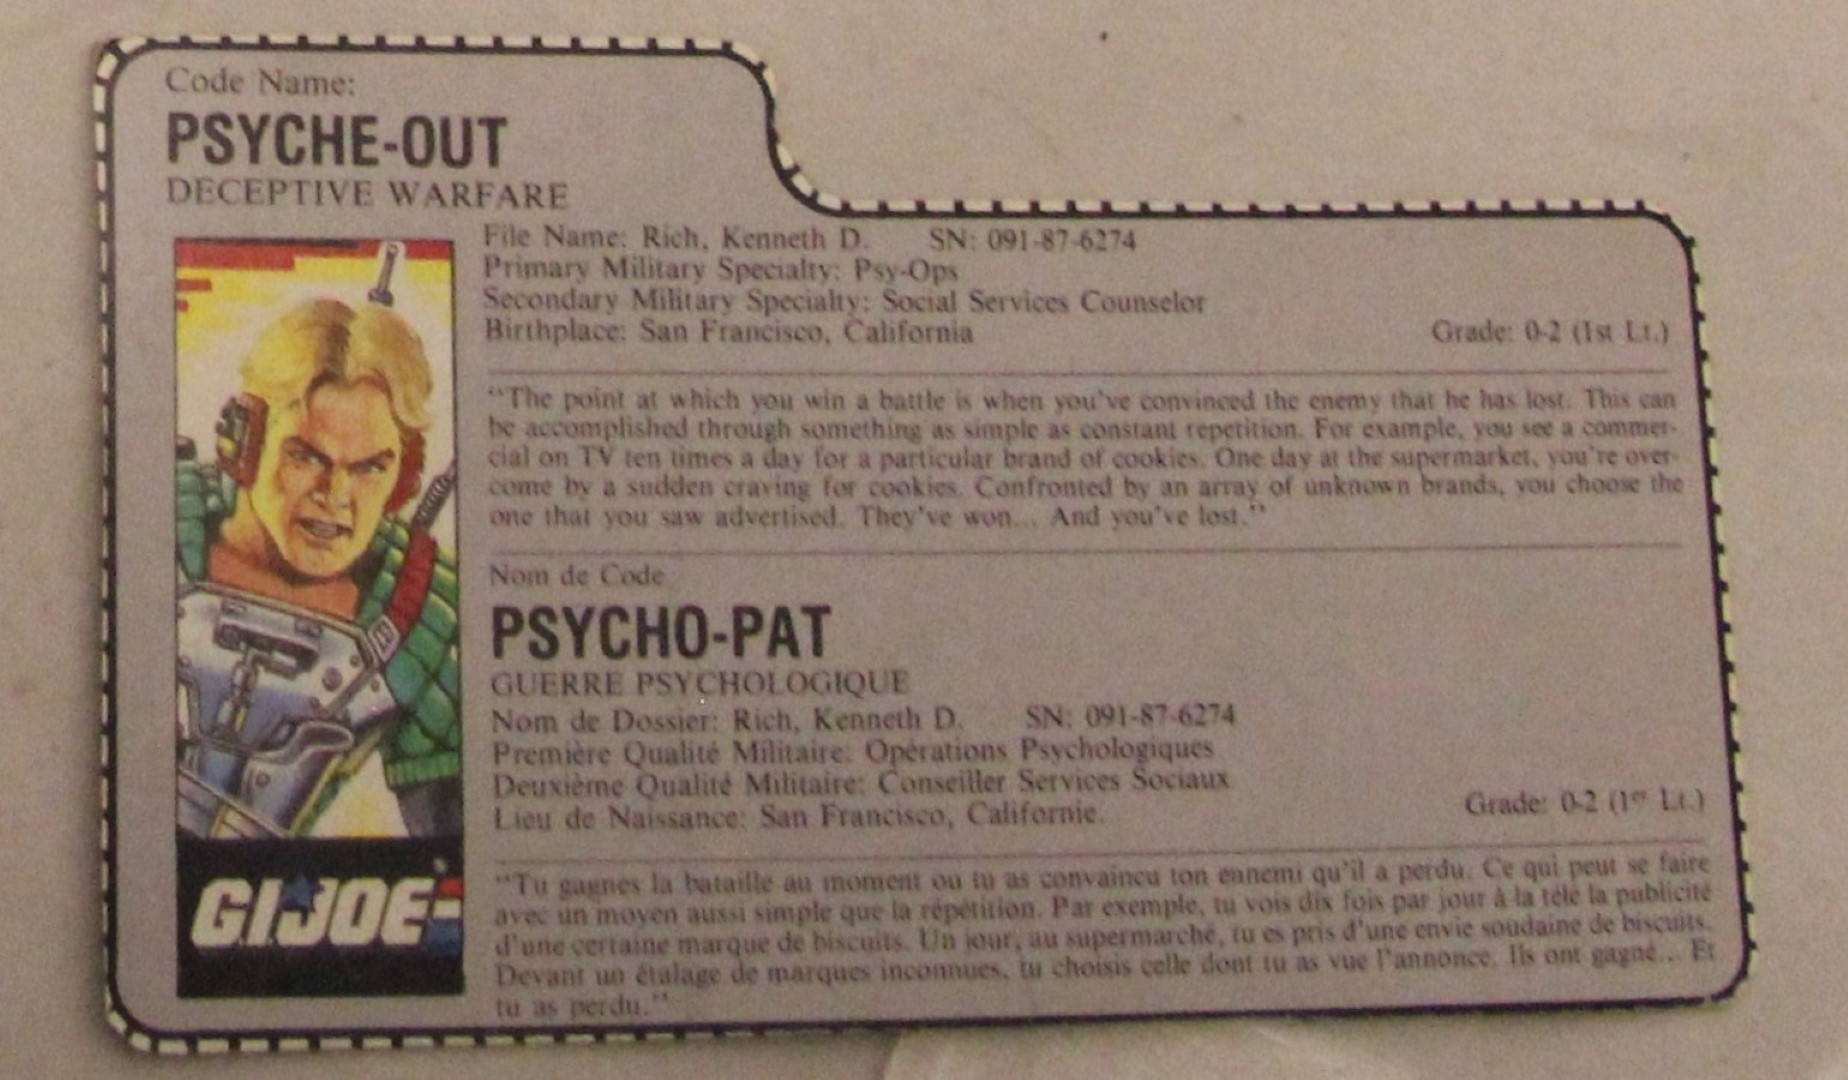 1987 psyche-out file card